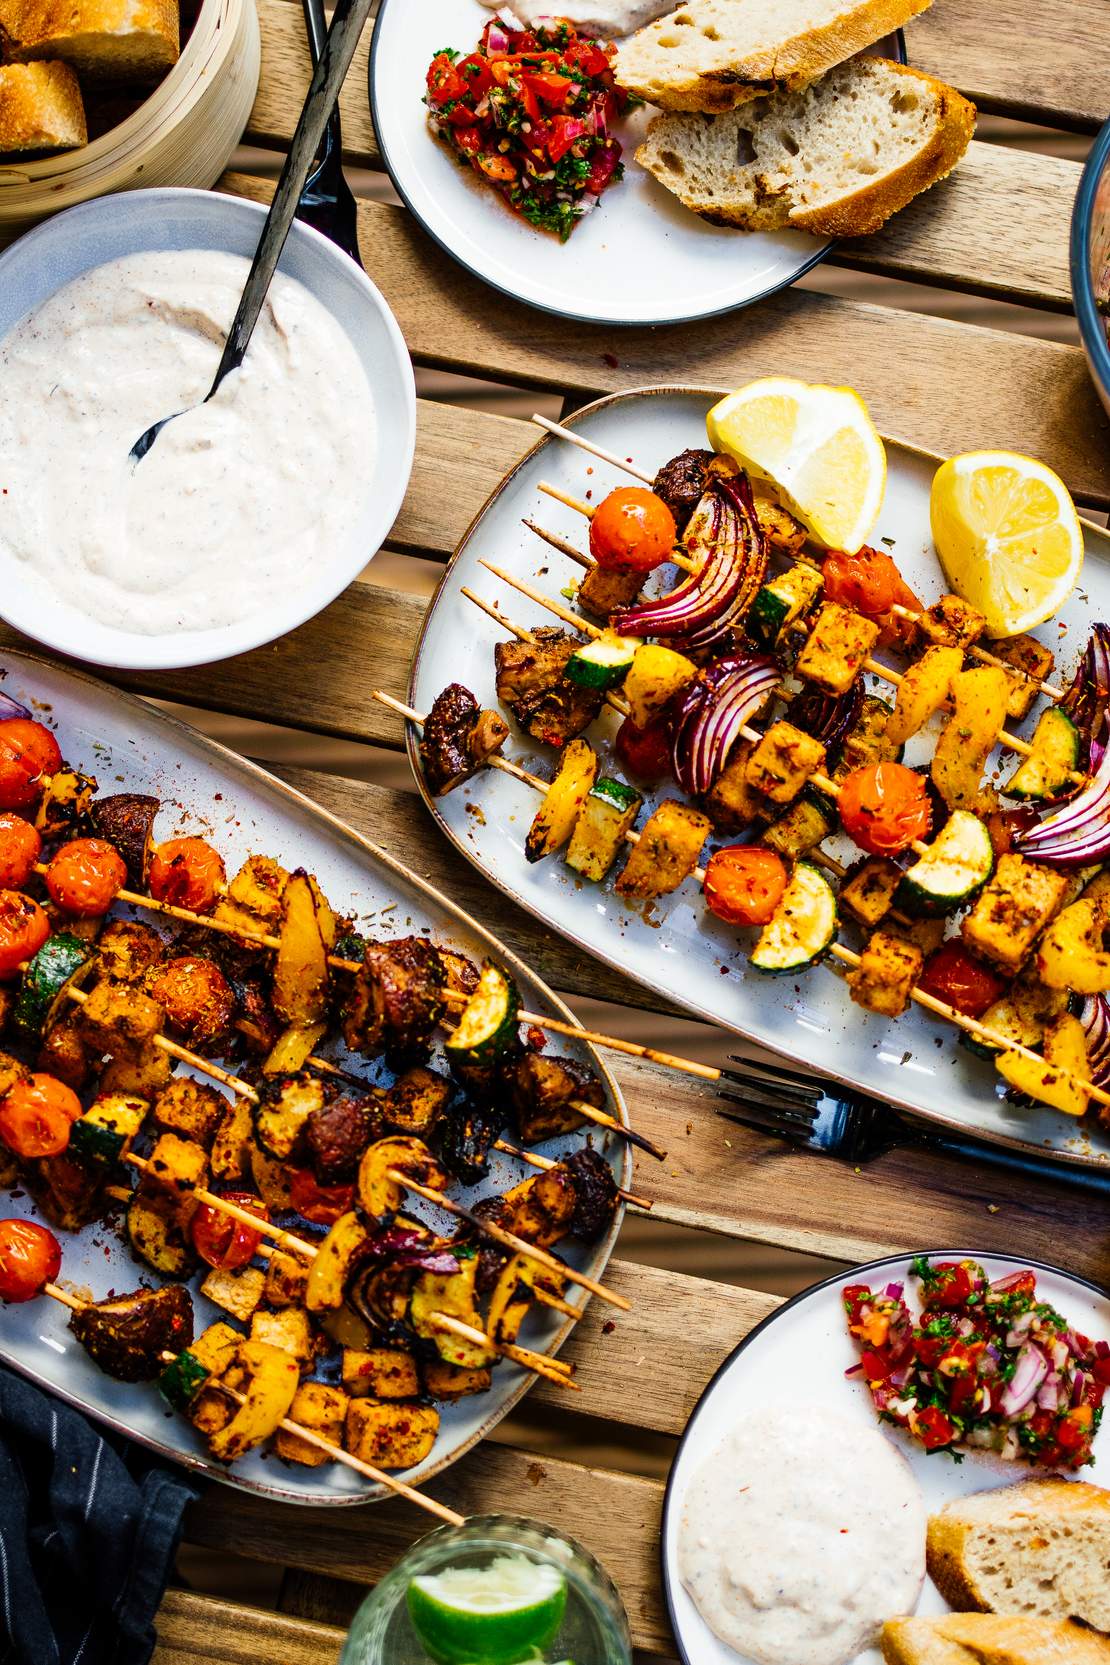 R651 Spicy vegan Tofu Skewers from the Grill